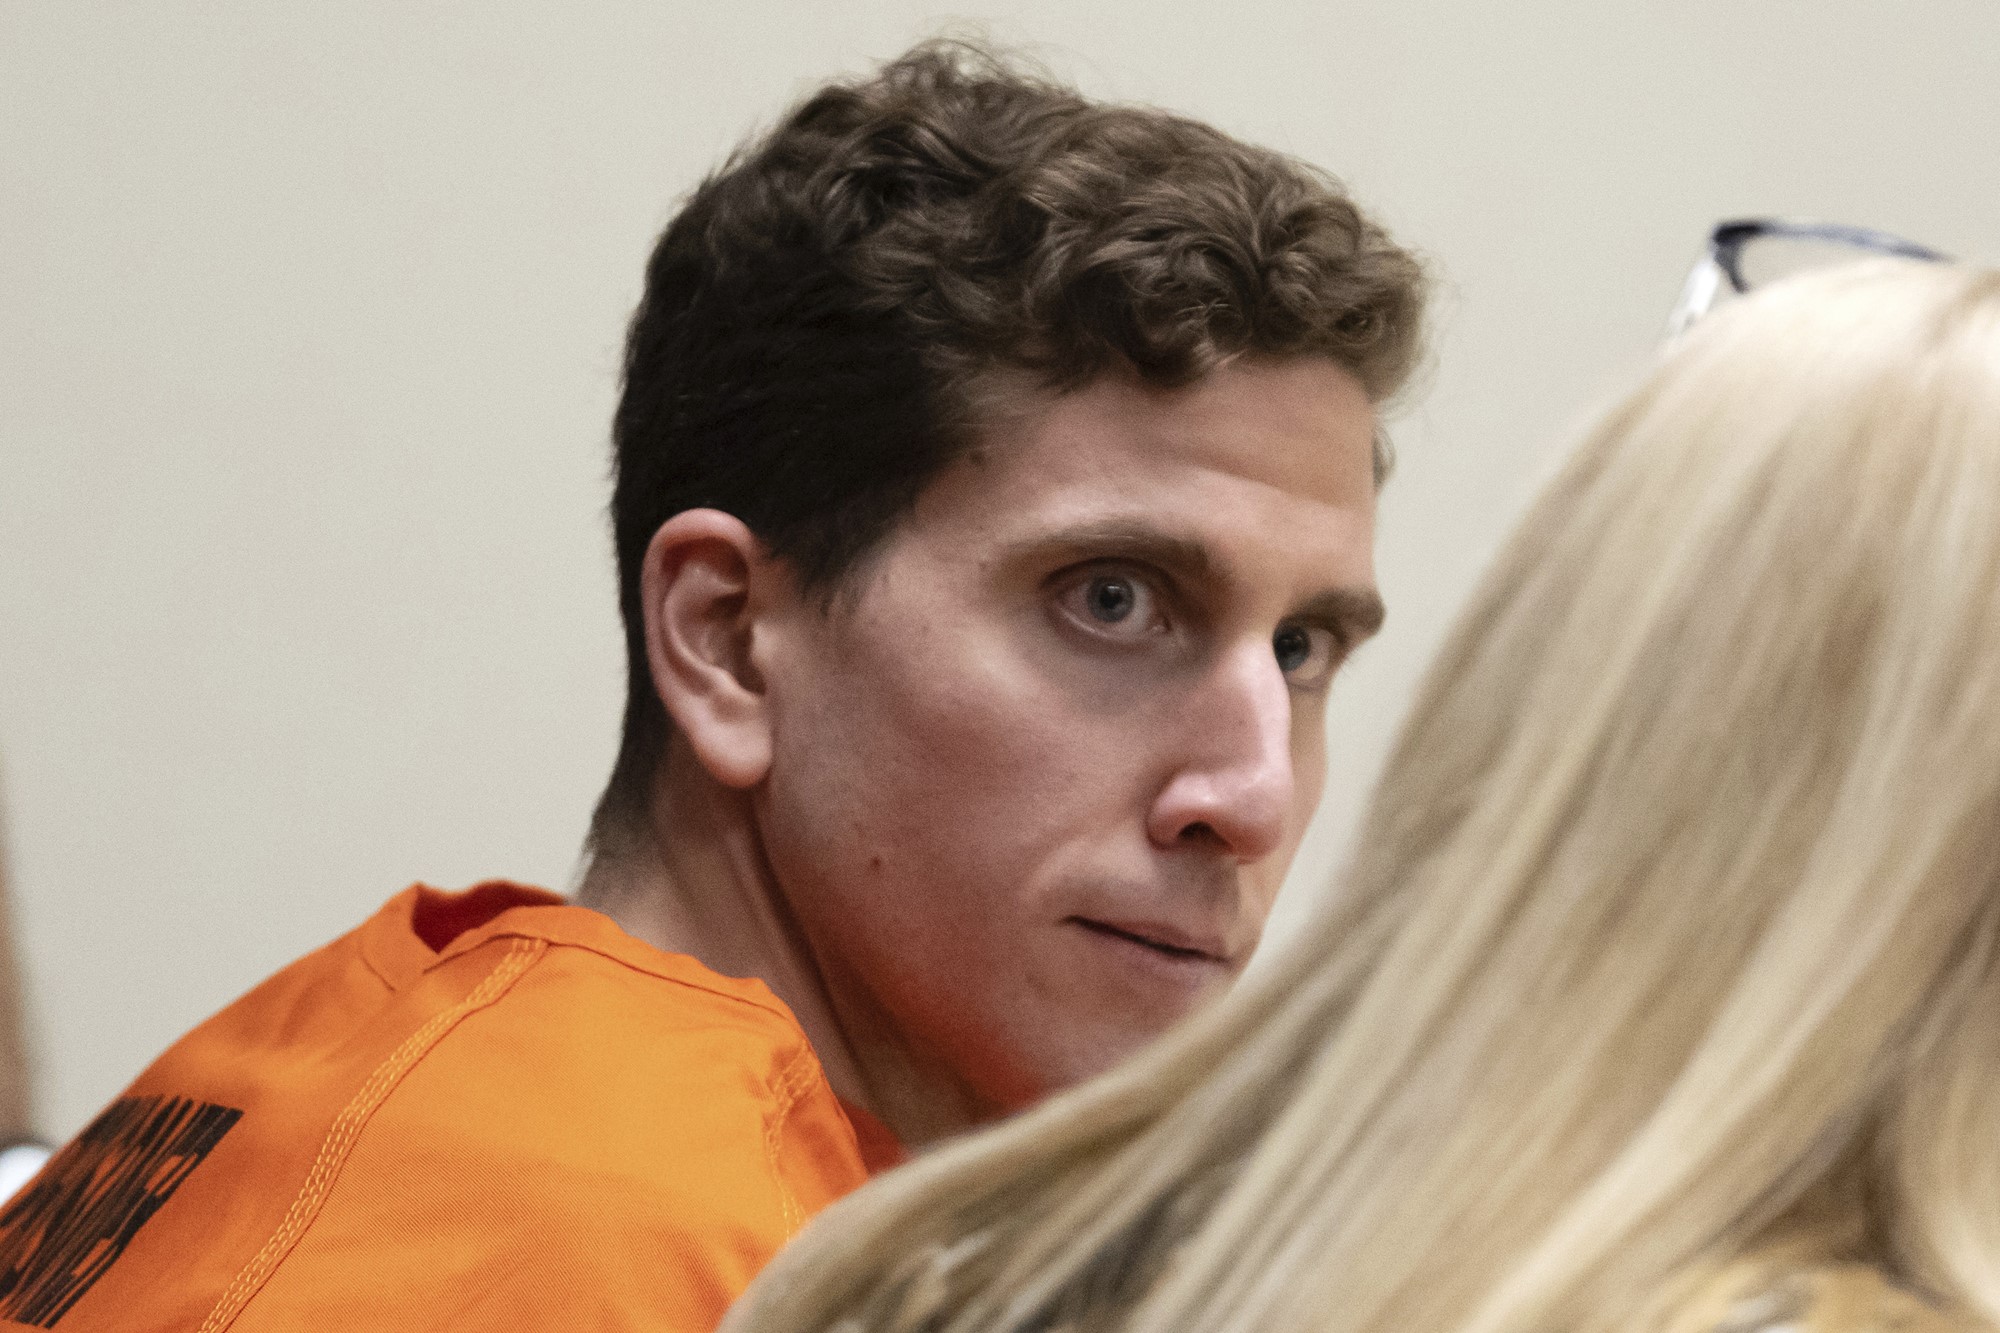 Brian Kohberger in orange jumpsuit looks toward a woman with blond hair. 